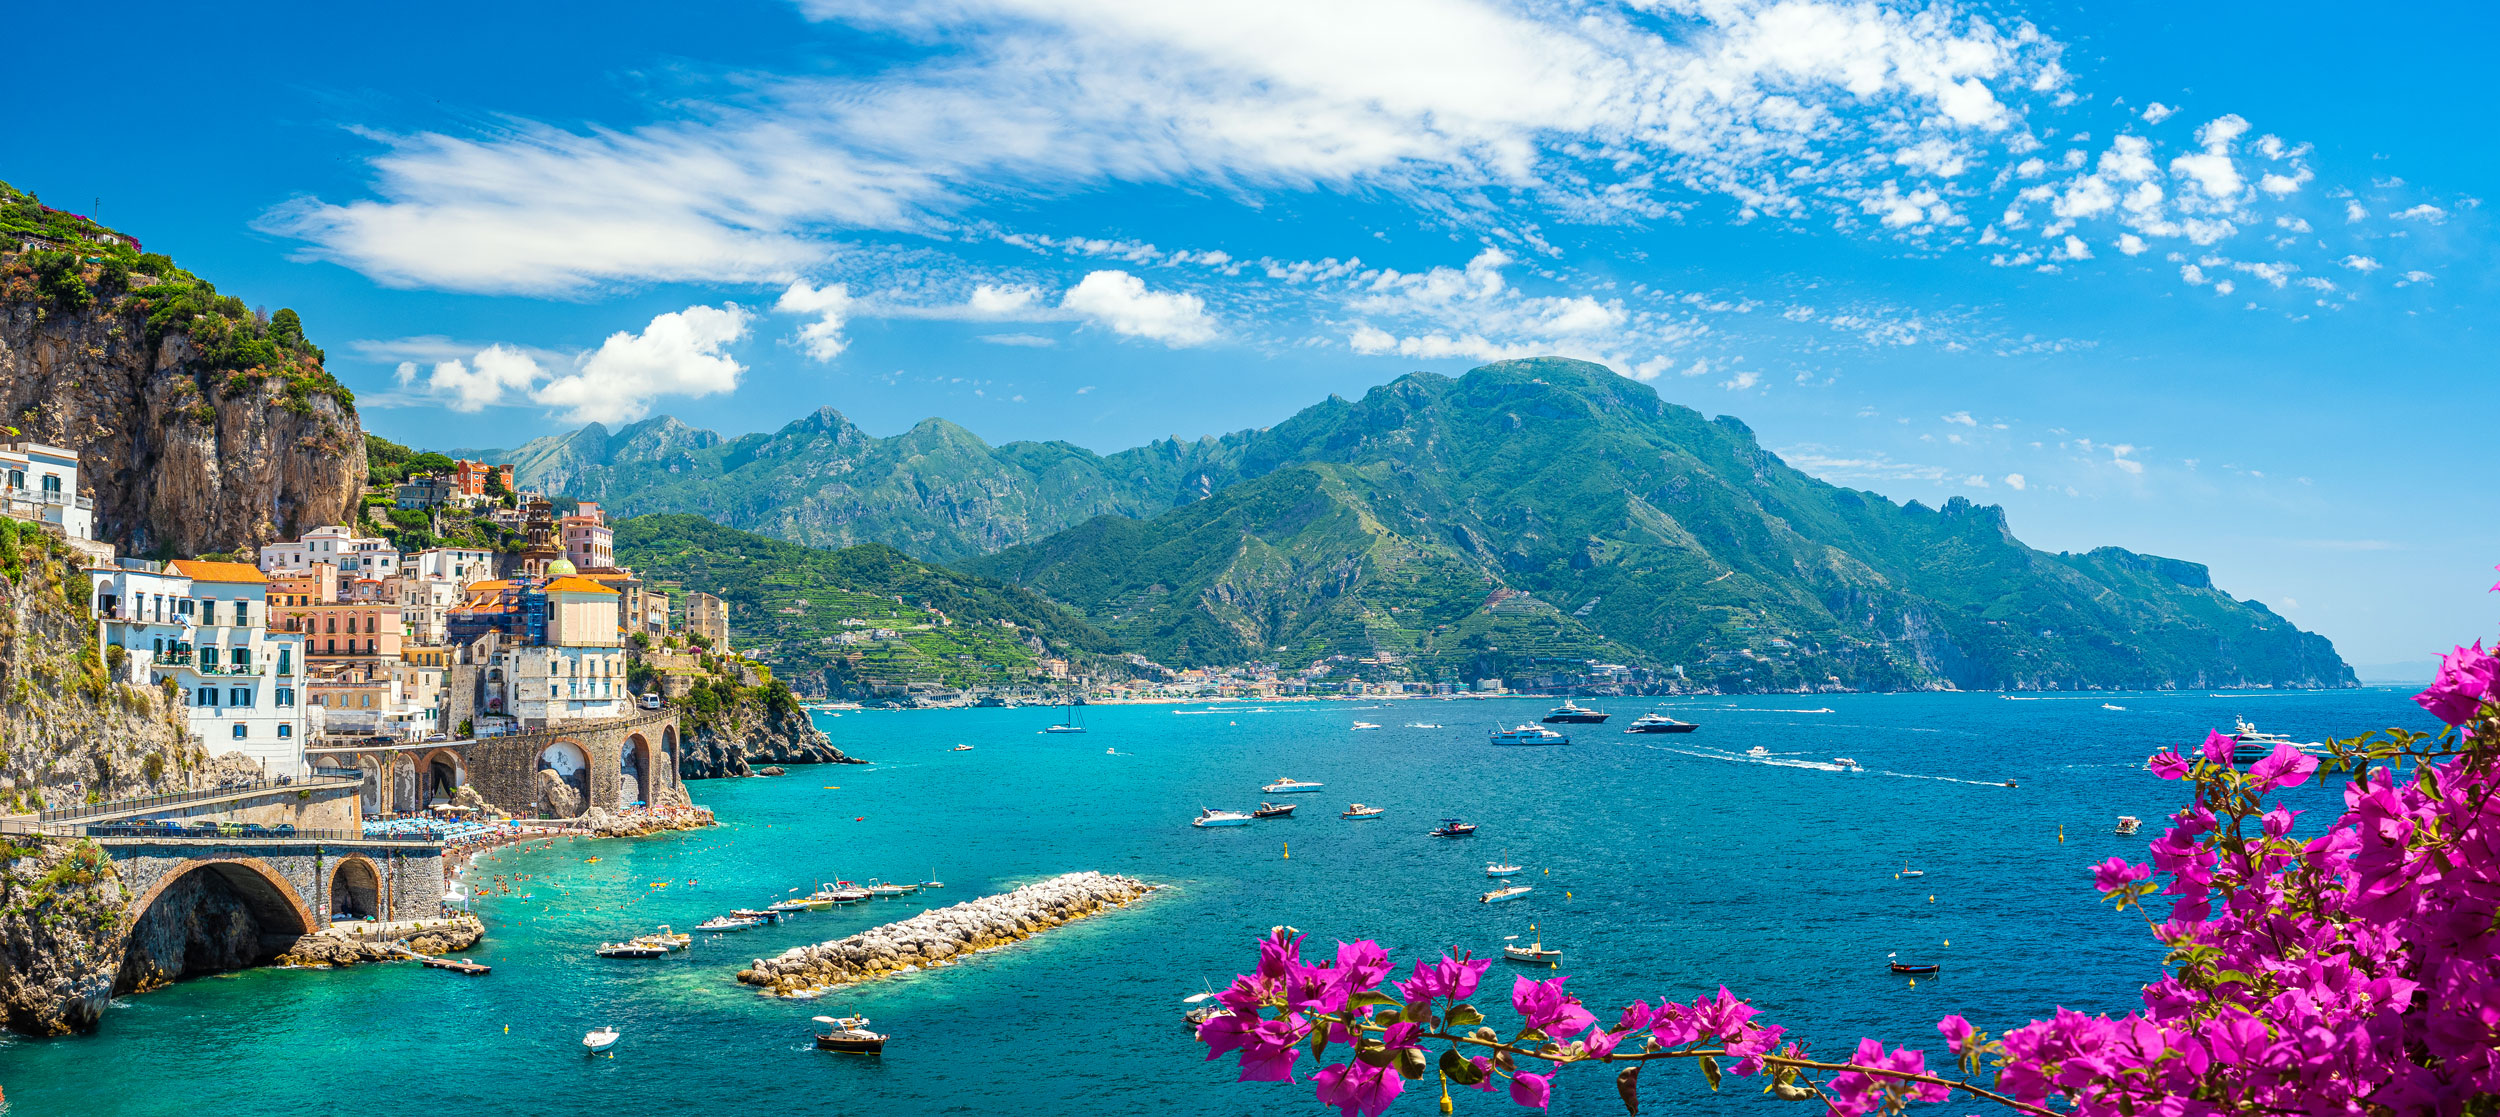 Discover Italy's Stunning Coast One Step at a Time - Xanterra